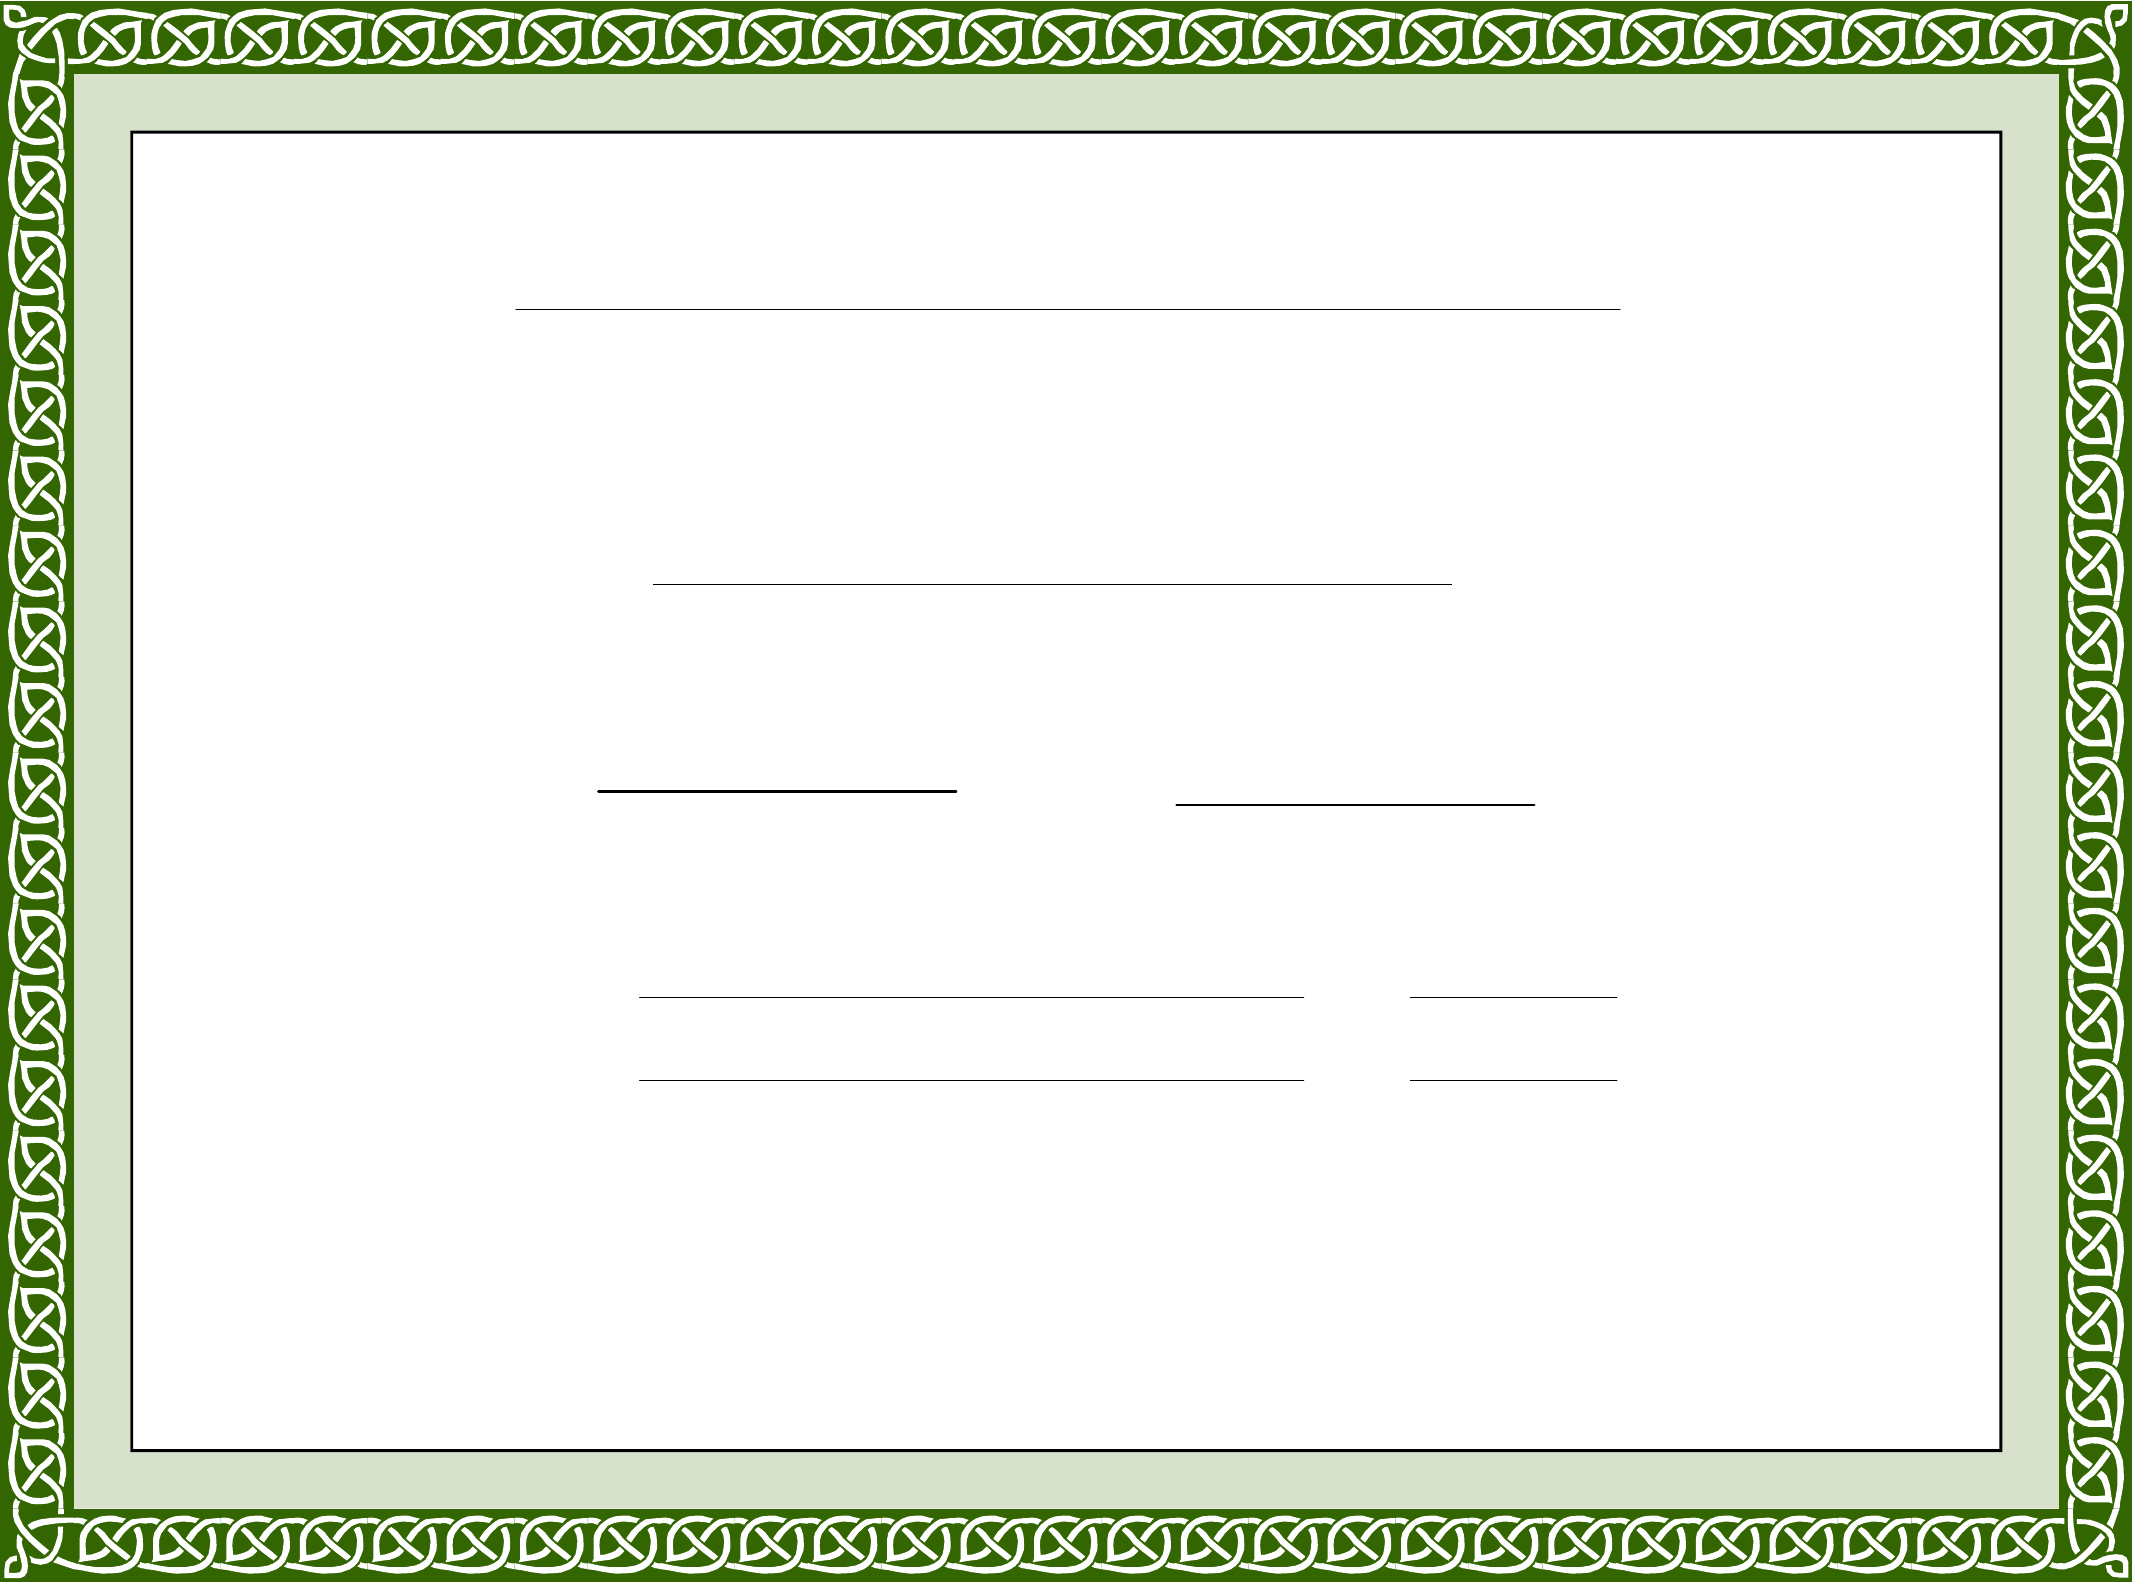 Training Certificate Template Free Download – Calep Pertaining To Blank Certificate Templates Free Download